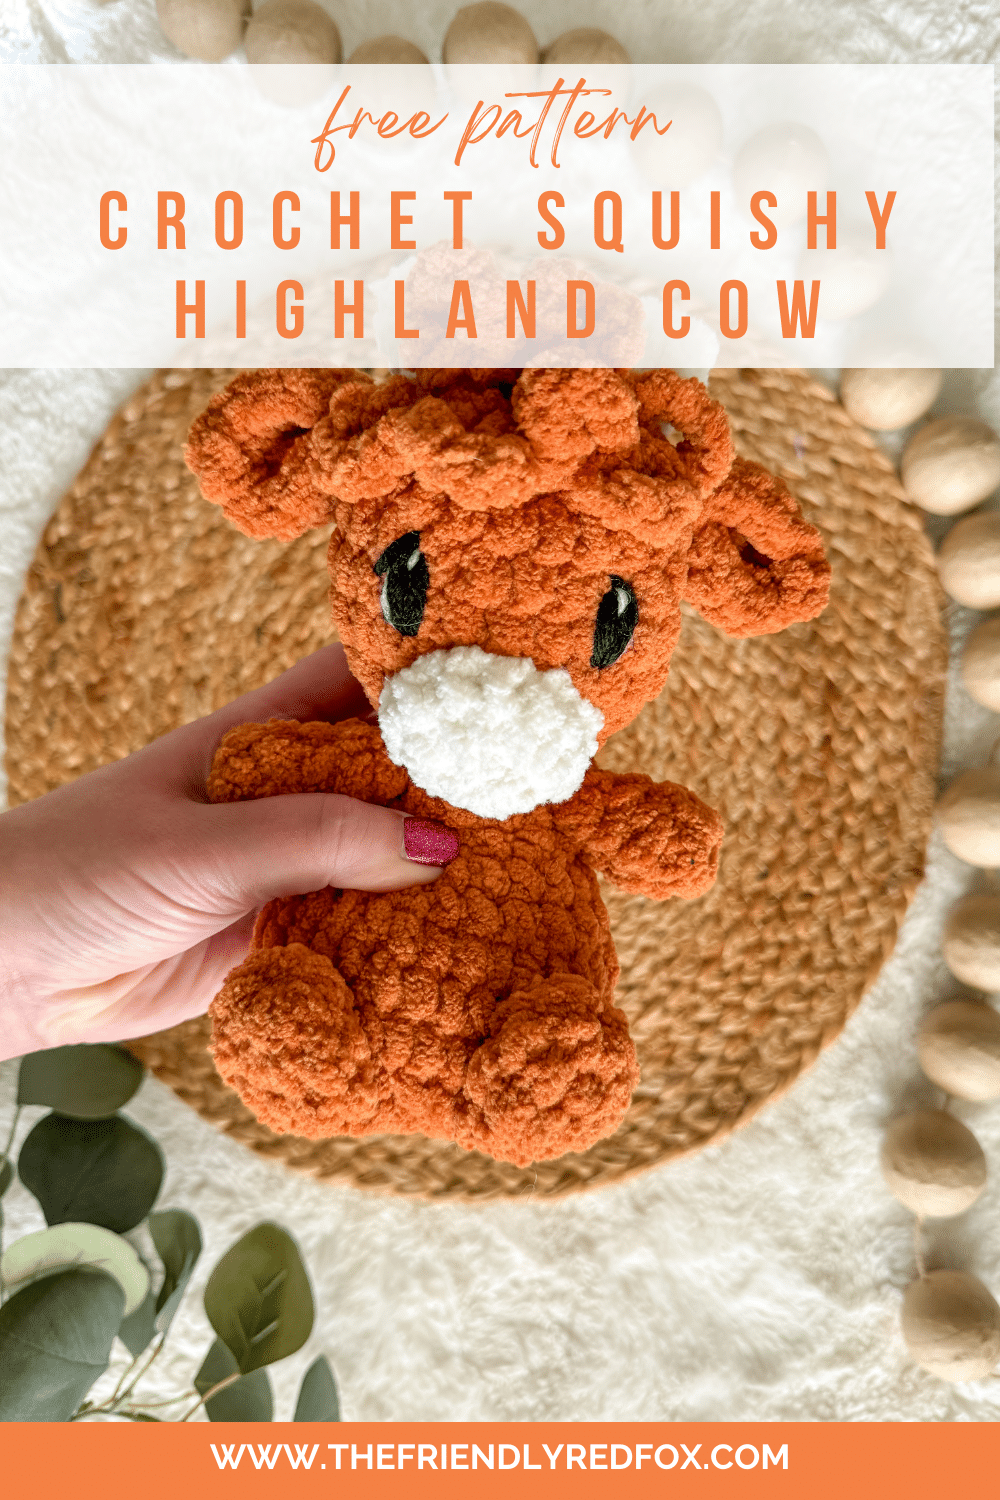 This is a free crochet pattern for the most adorable squishy highland cow! Understuffed body and cuddly blanket yarn make this the perfect gift for small ones!